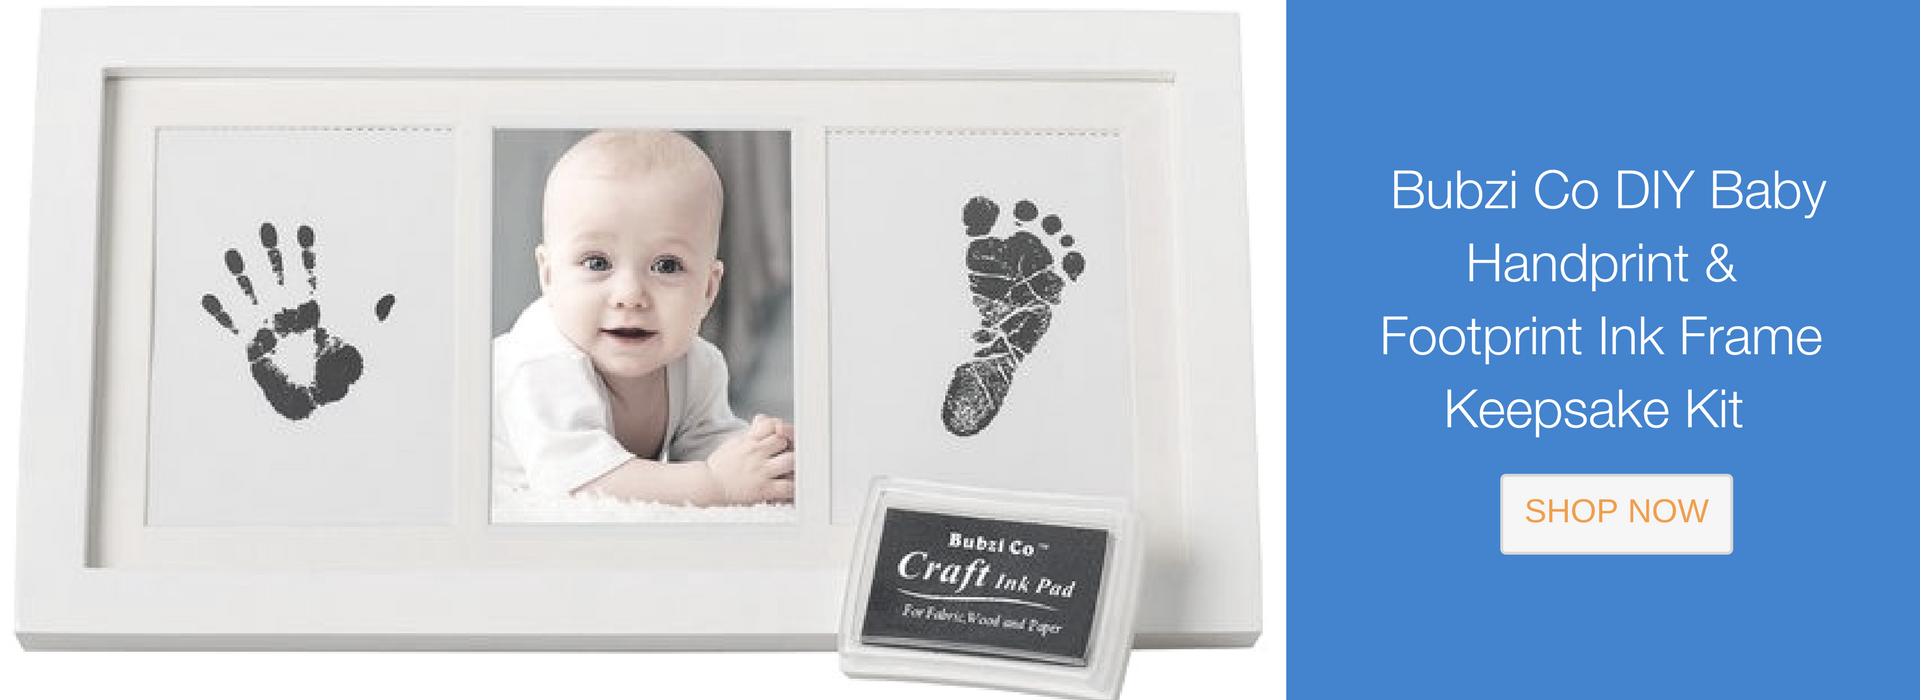 Capturing your baby’s foot & #handprints into a unique & memorable piece of art makes a great gift for grandparents, for dad or even as a Mother’s Day gift. And adding in a special quote adds a touch of personalization that you won’t find in anything you pick up at the store. Using a kit like #BubziCo DIY Baby Foot & Handprint Ink Frame makes the job that much easier, plus it’s safe & non-toxic.  It’s a gift they’re sure to love! #BabyShowerGifts #NewBornPortraits #BabyCrafts #BabyArtPrint #BabyThings